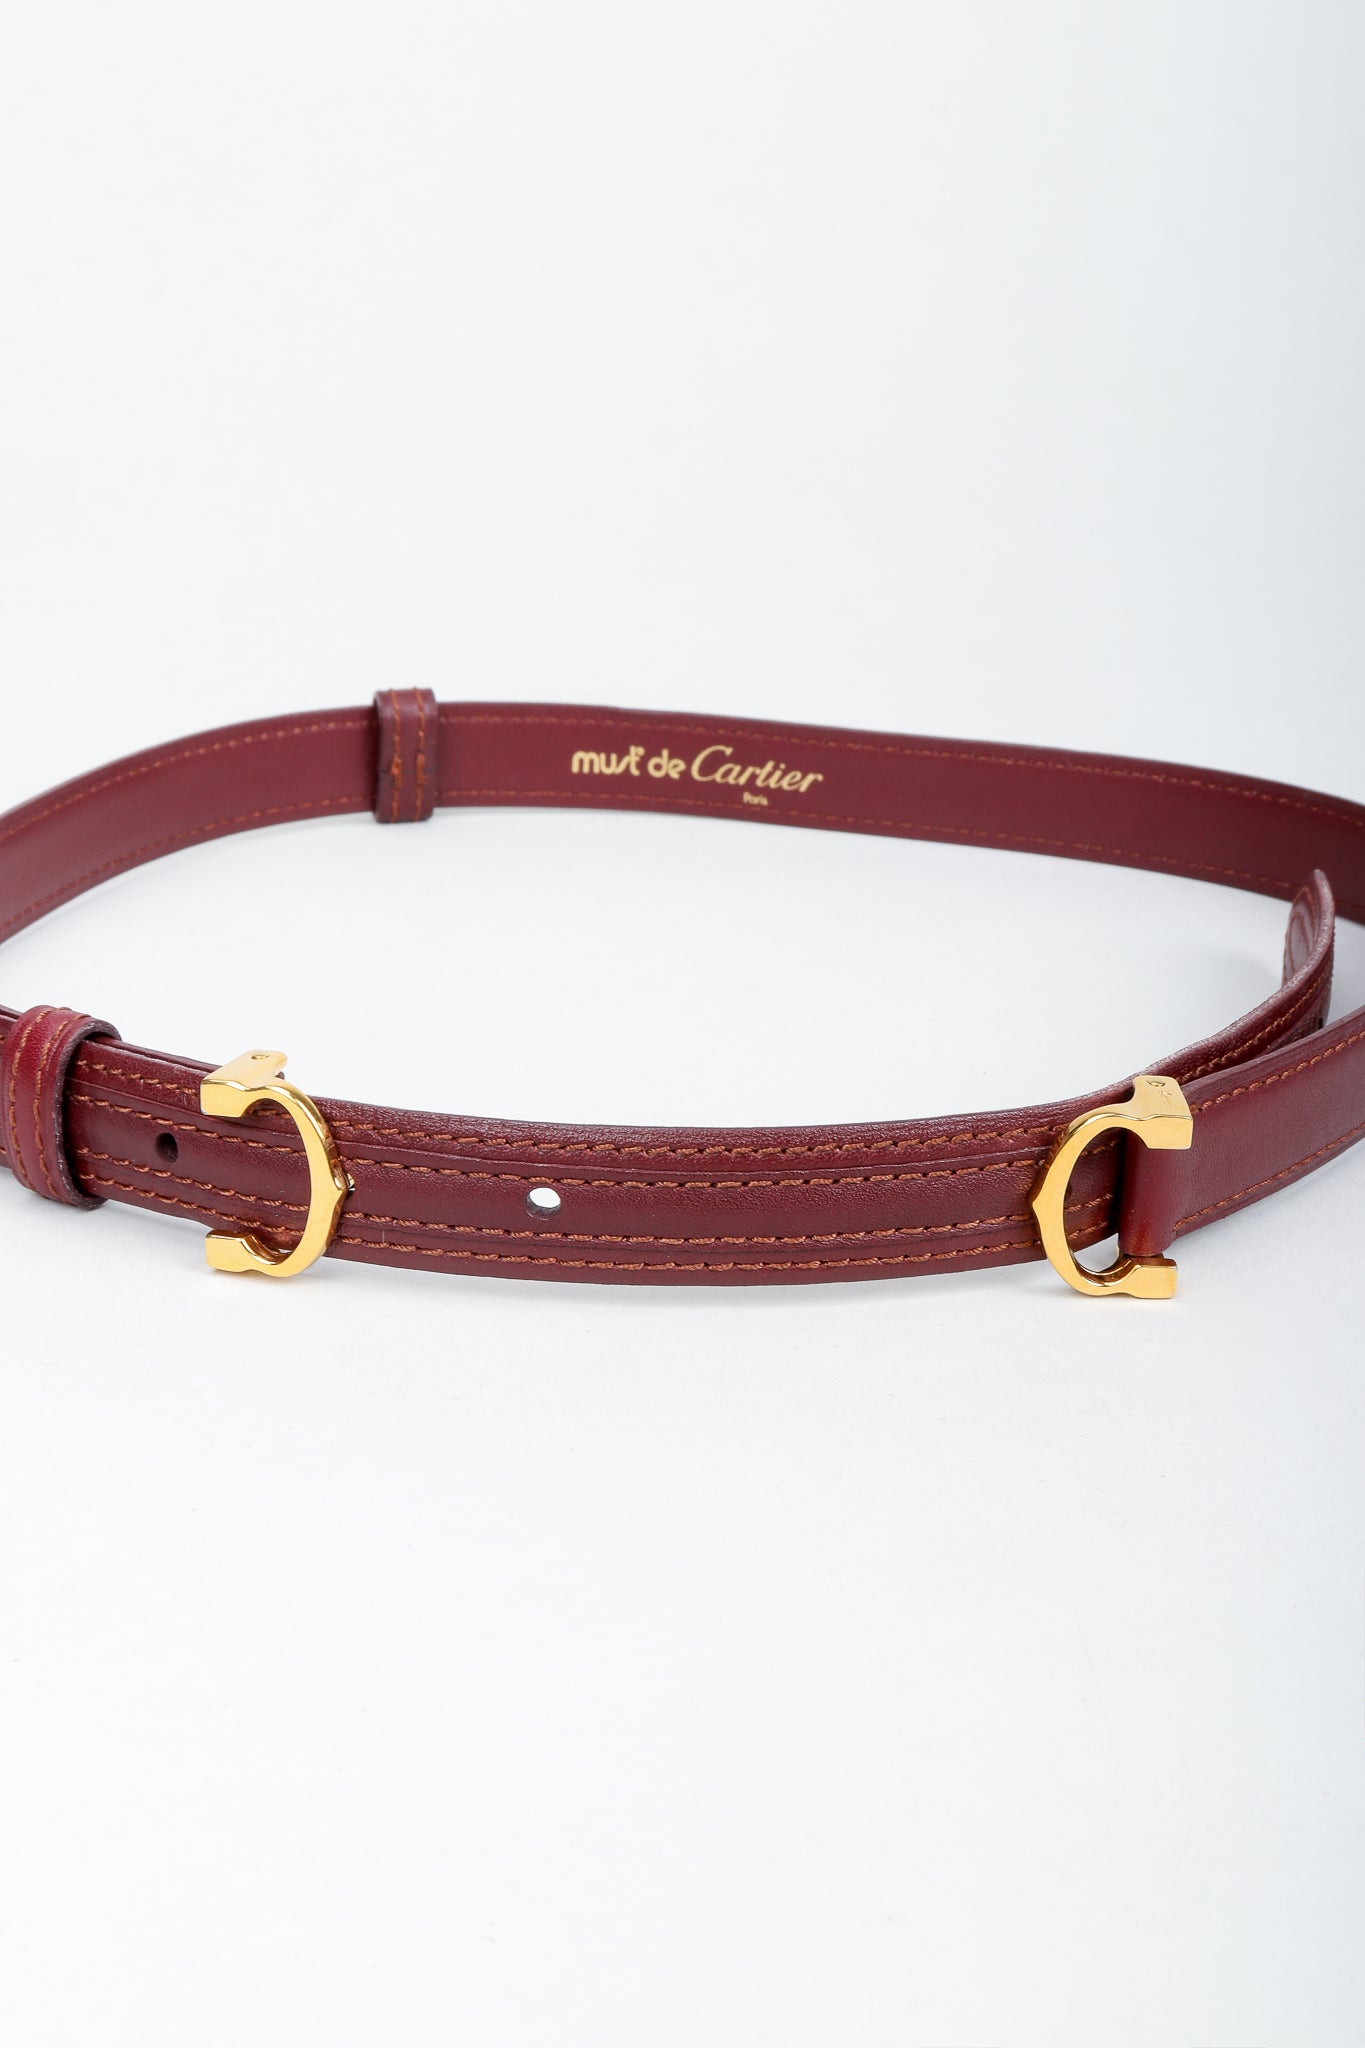 Vintage Cartier Oxblood Double CC Leather Belt at Recess Los Angeles on Grey